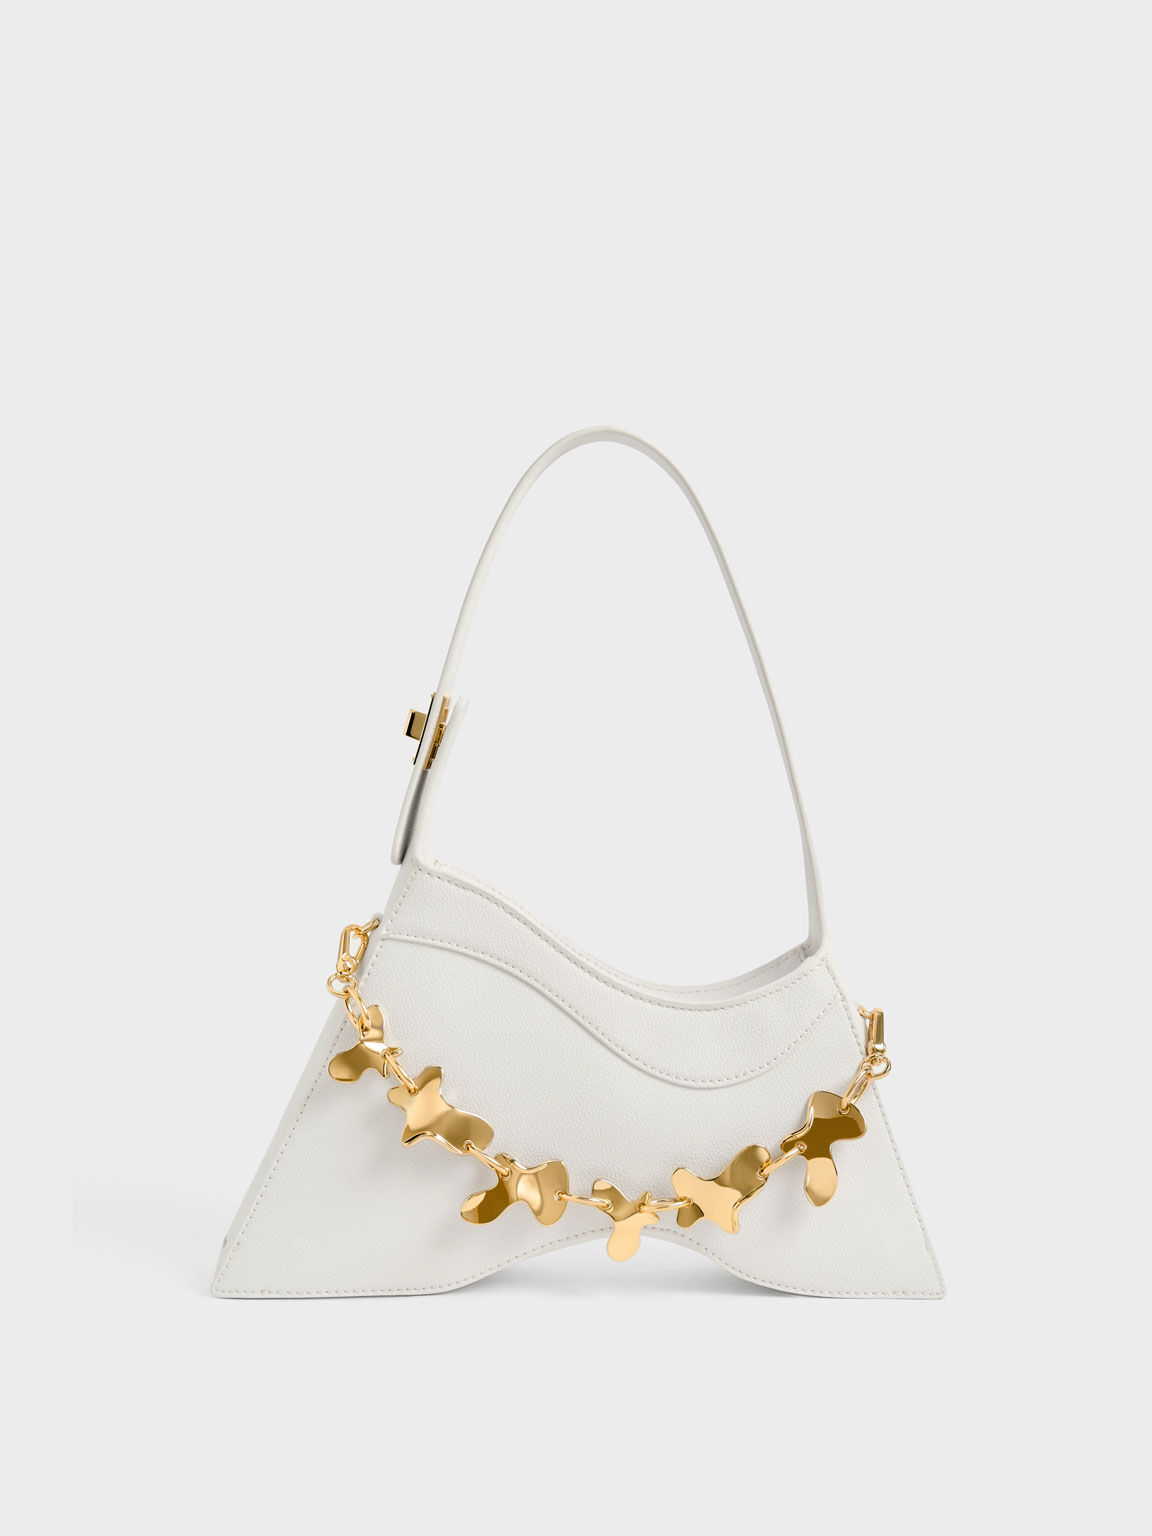 White Verity Chain-Link Sculptural Bag - CHARLES & KEITH MO